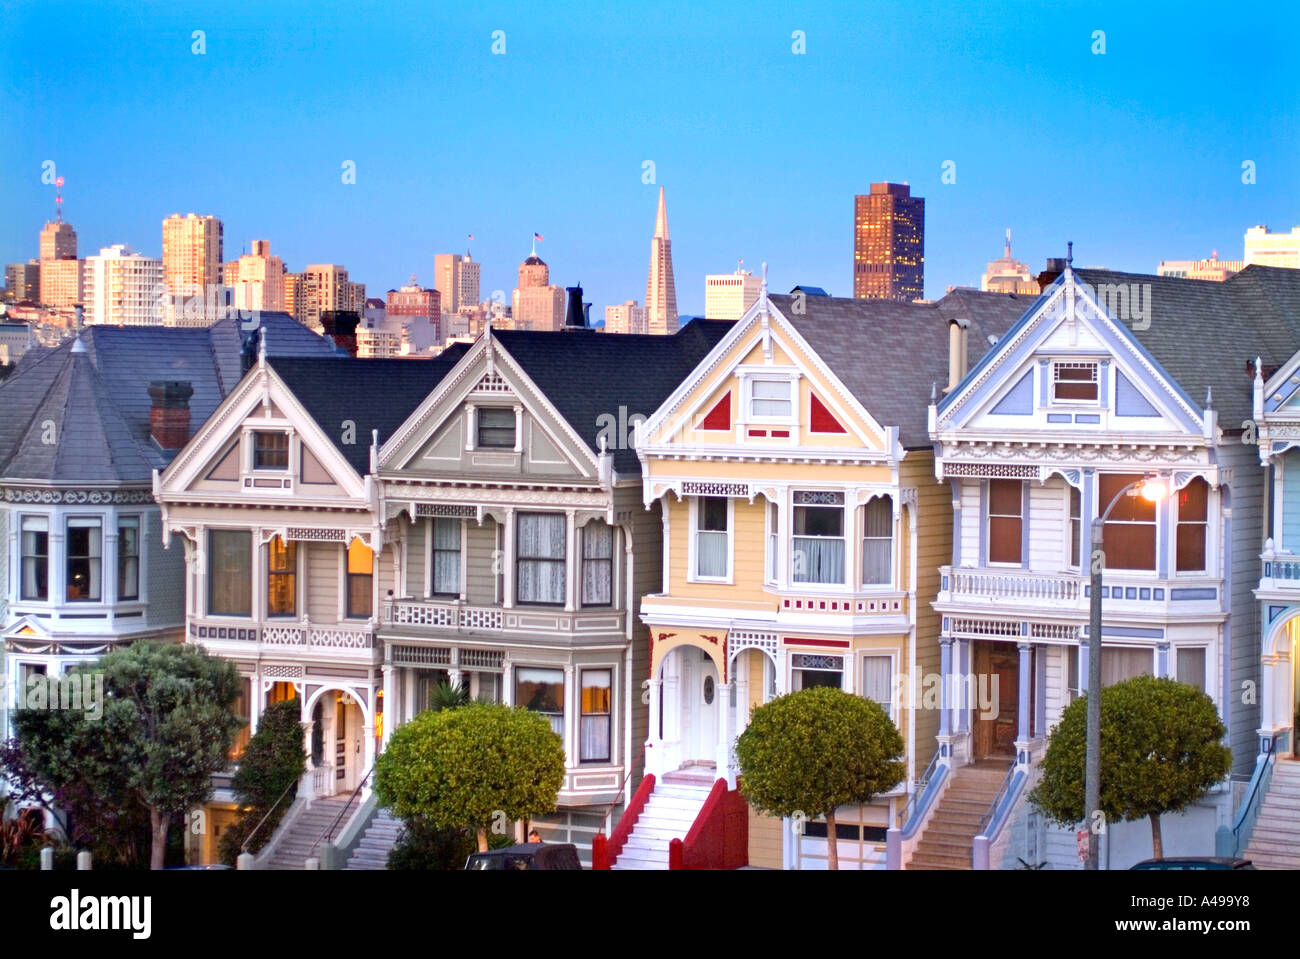 Post card row photo of the Victorian homes known as the Painted Ladies and the San Francisco skyline Stock Photo